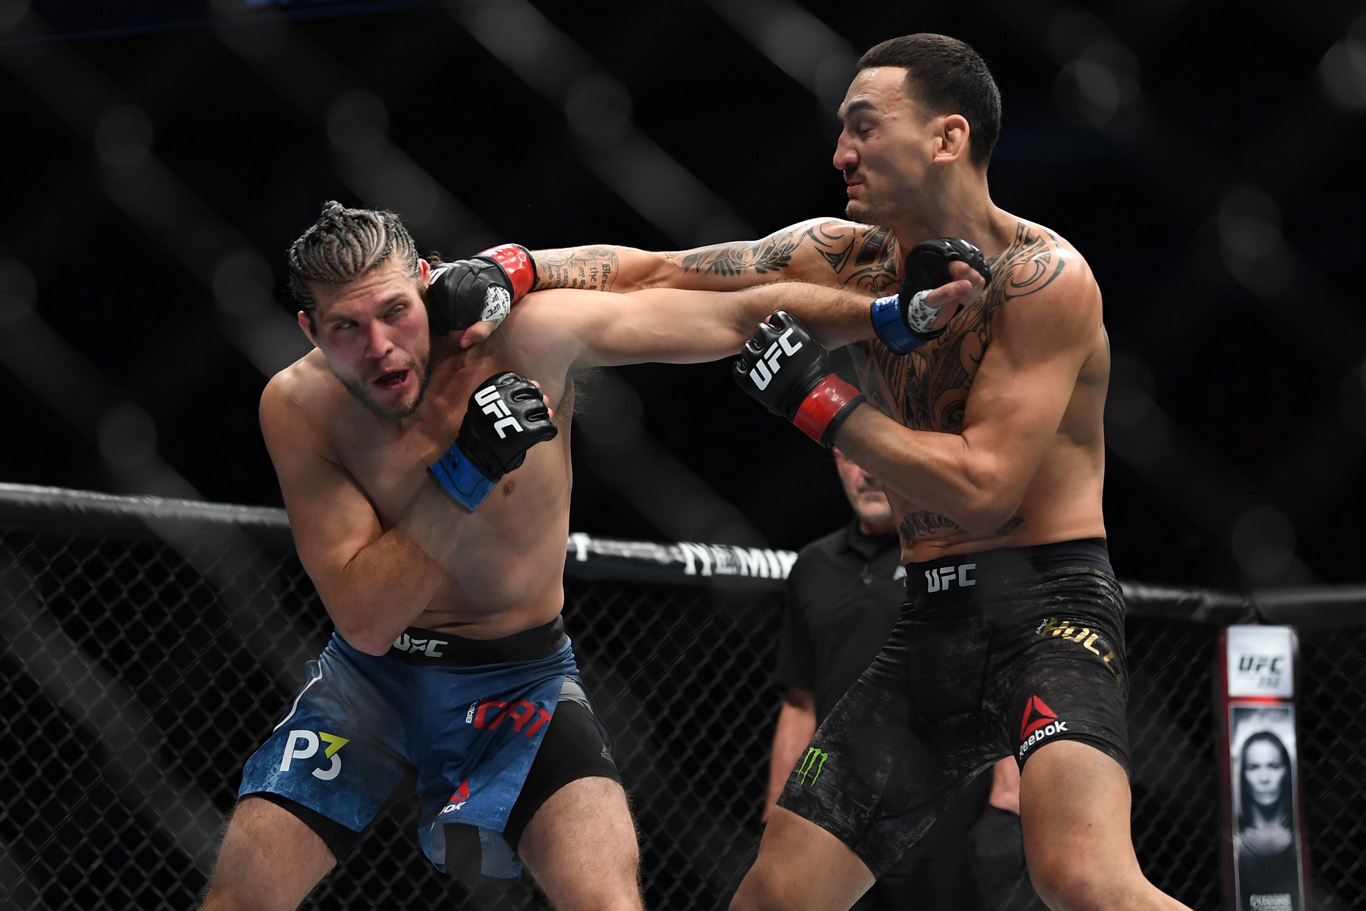 Monster Energy’s Max Holloway Defeats Brian Ortega in Thrilling Four-Round Match At UFC 231